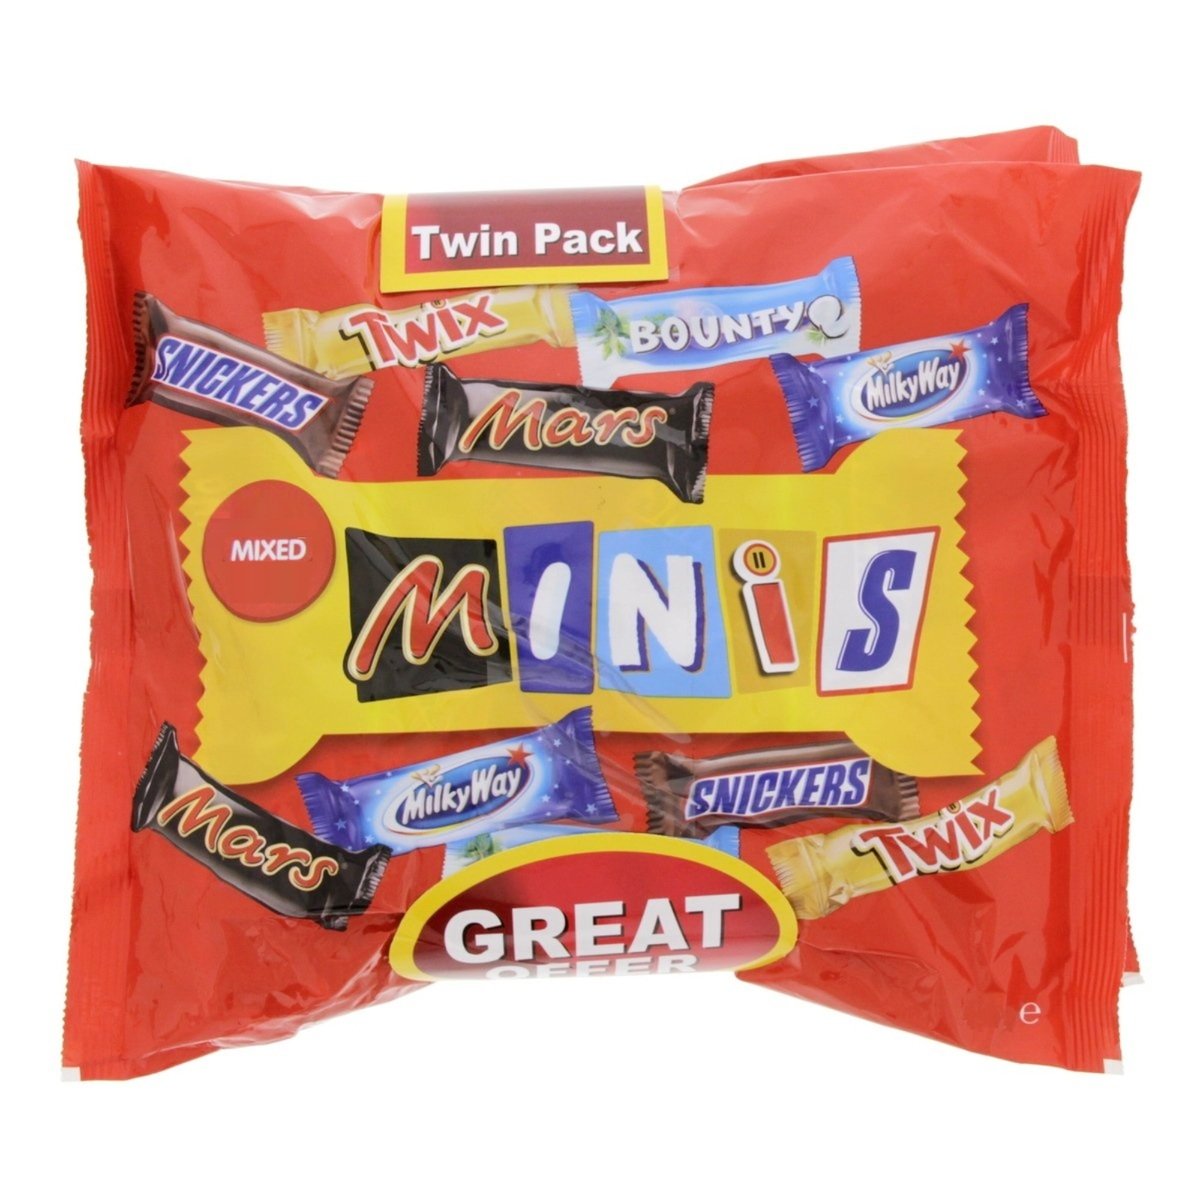 Galaxy Mixed Chocolate Minis Value Pack 2 x 400 g